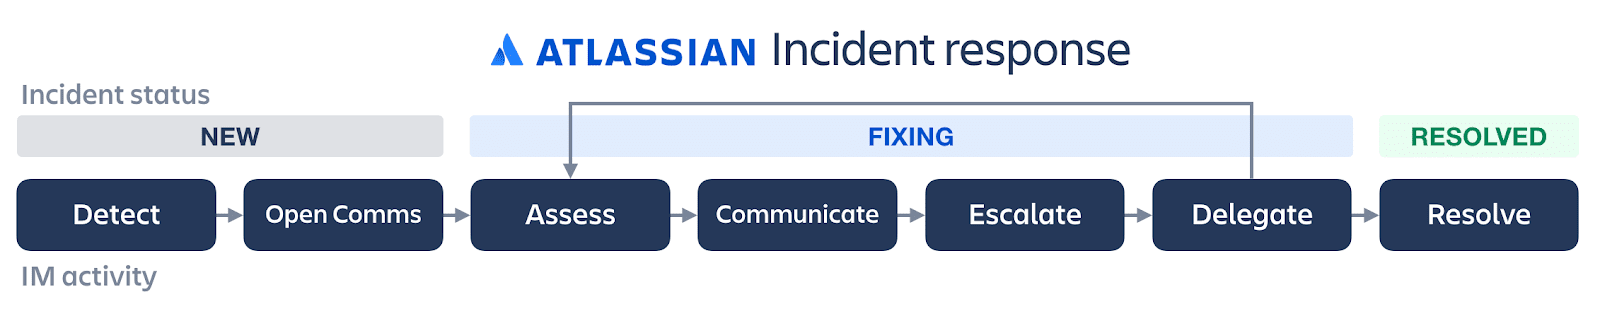 Atlassian's incident response lyfecycle chart